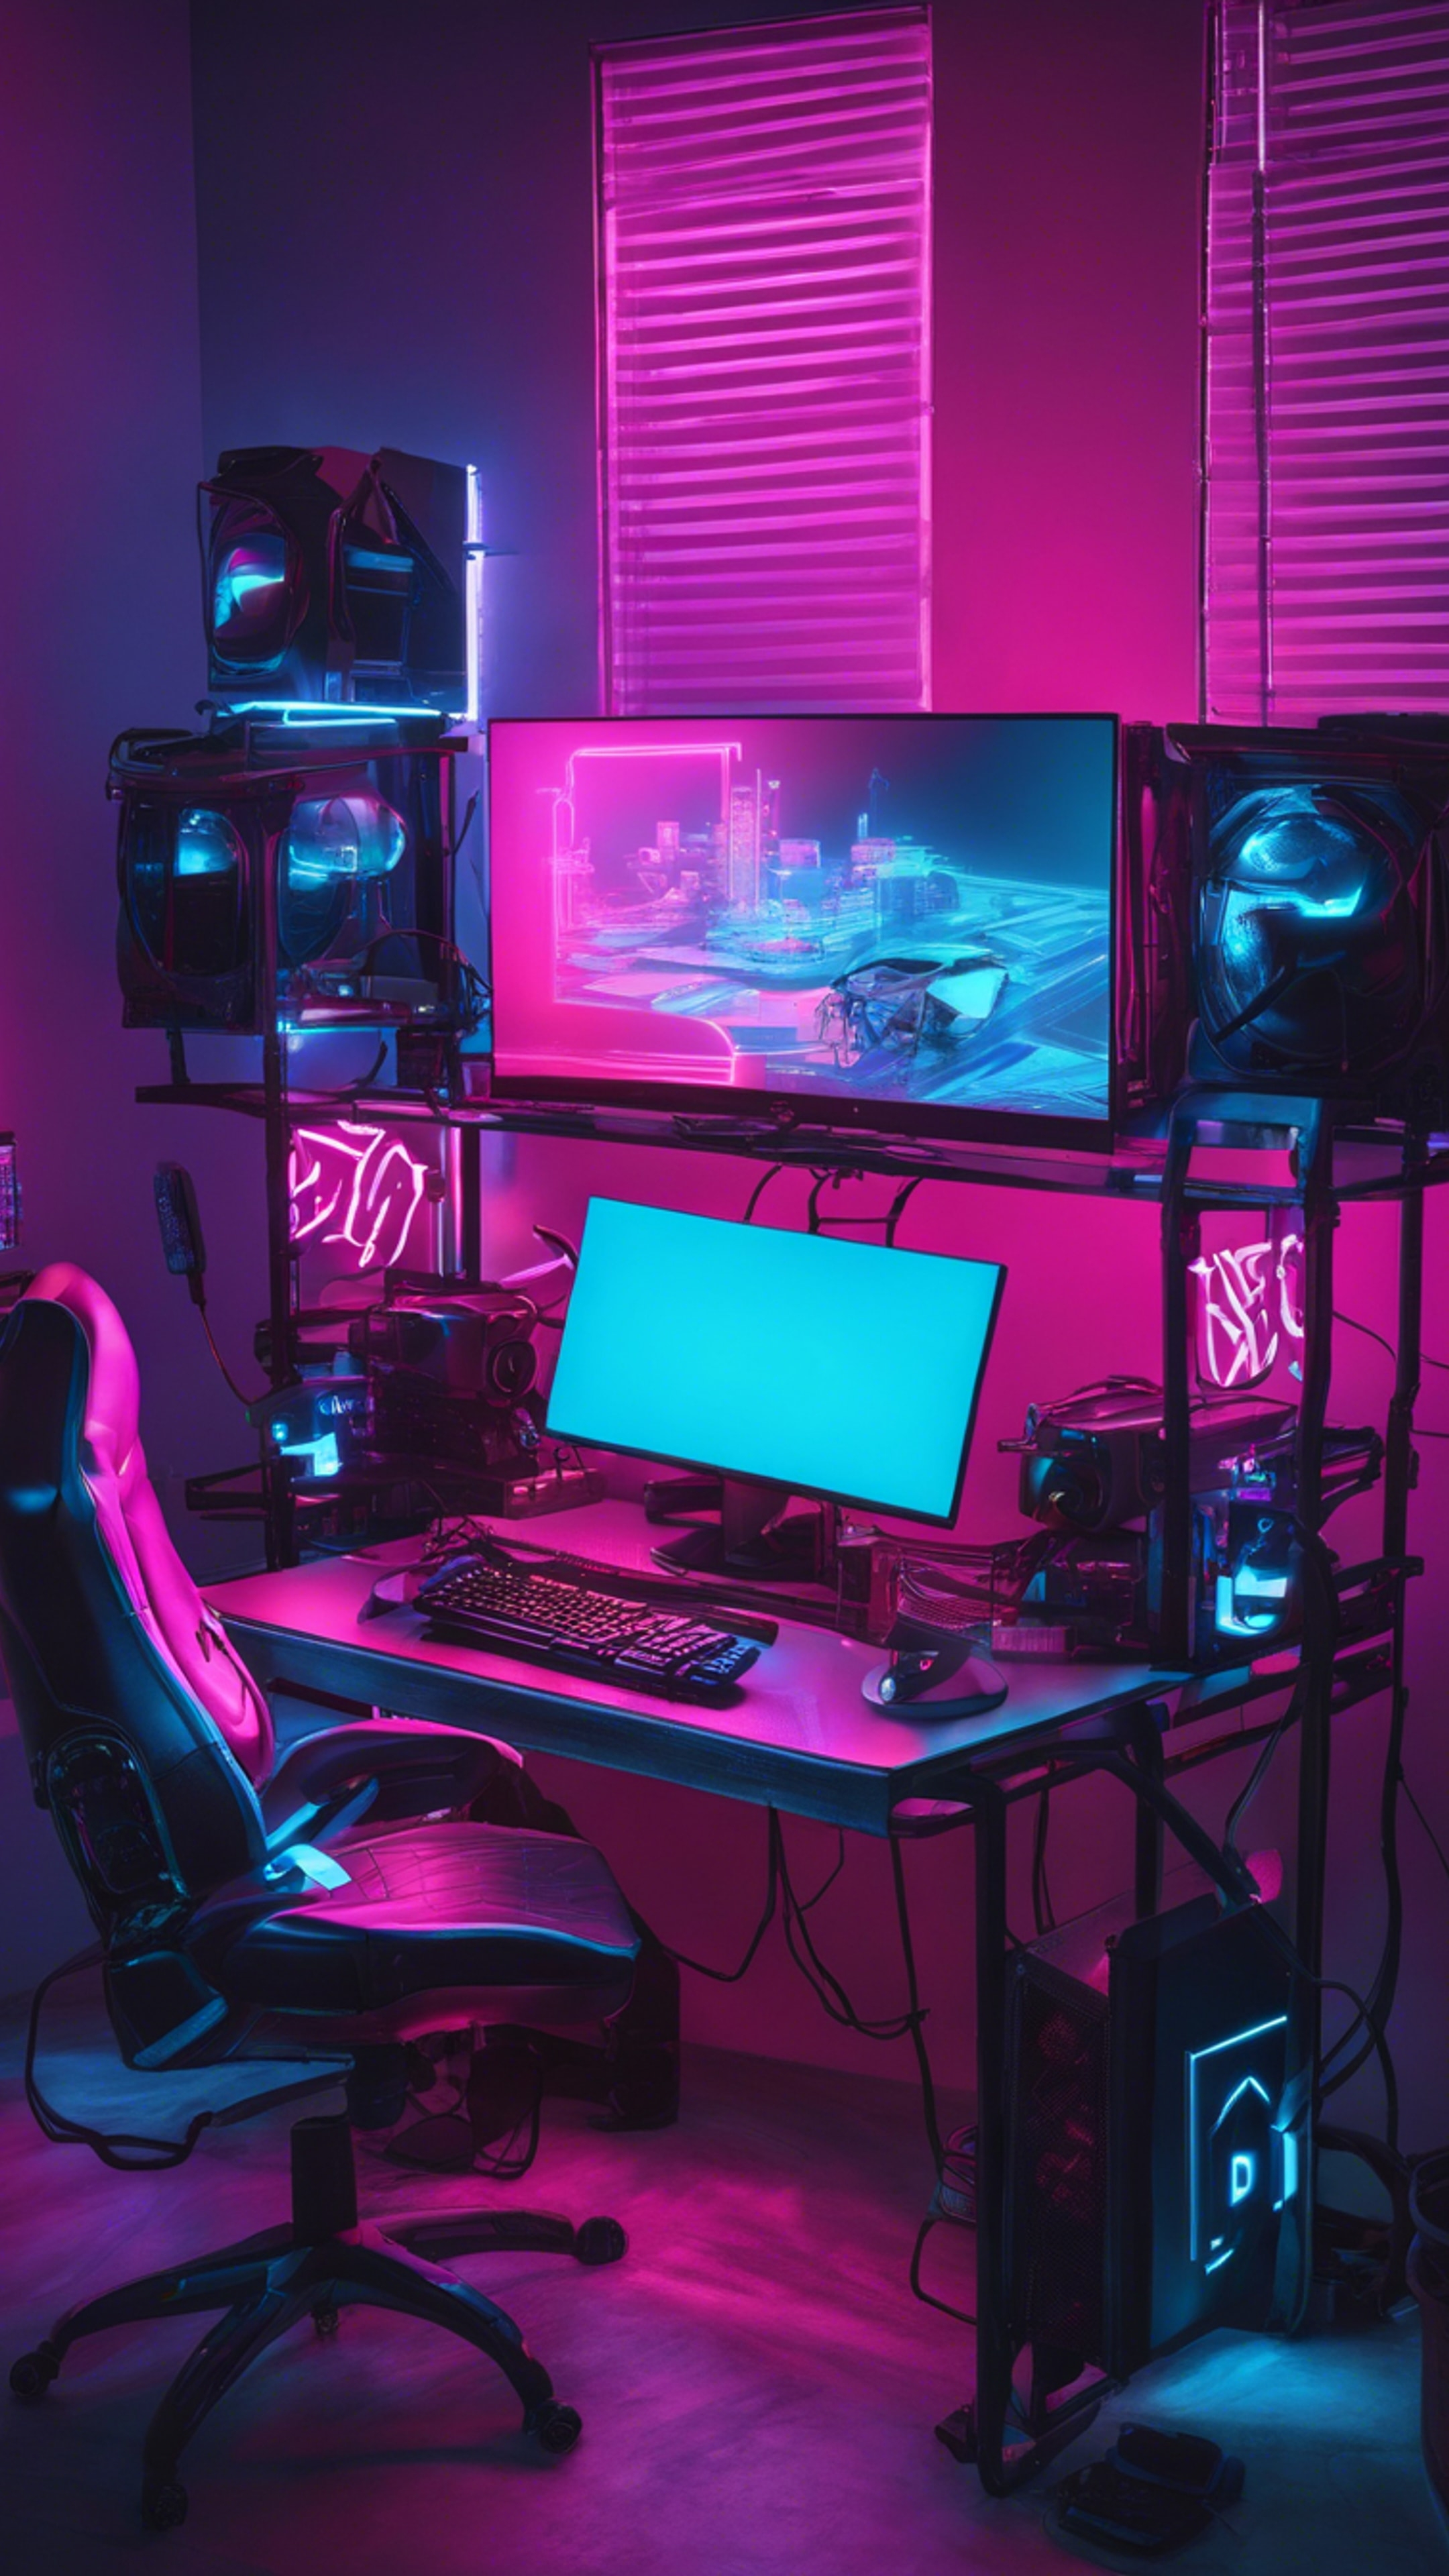 A neon blue gaming setup with a high-end PC, LED keyboard and a gaming monitor. Wallpaper[173ea11d79a5456c932c]